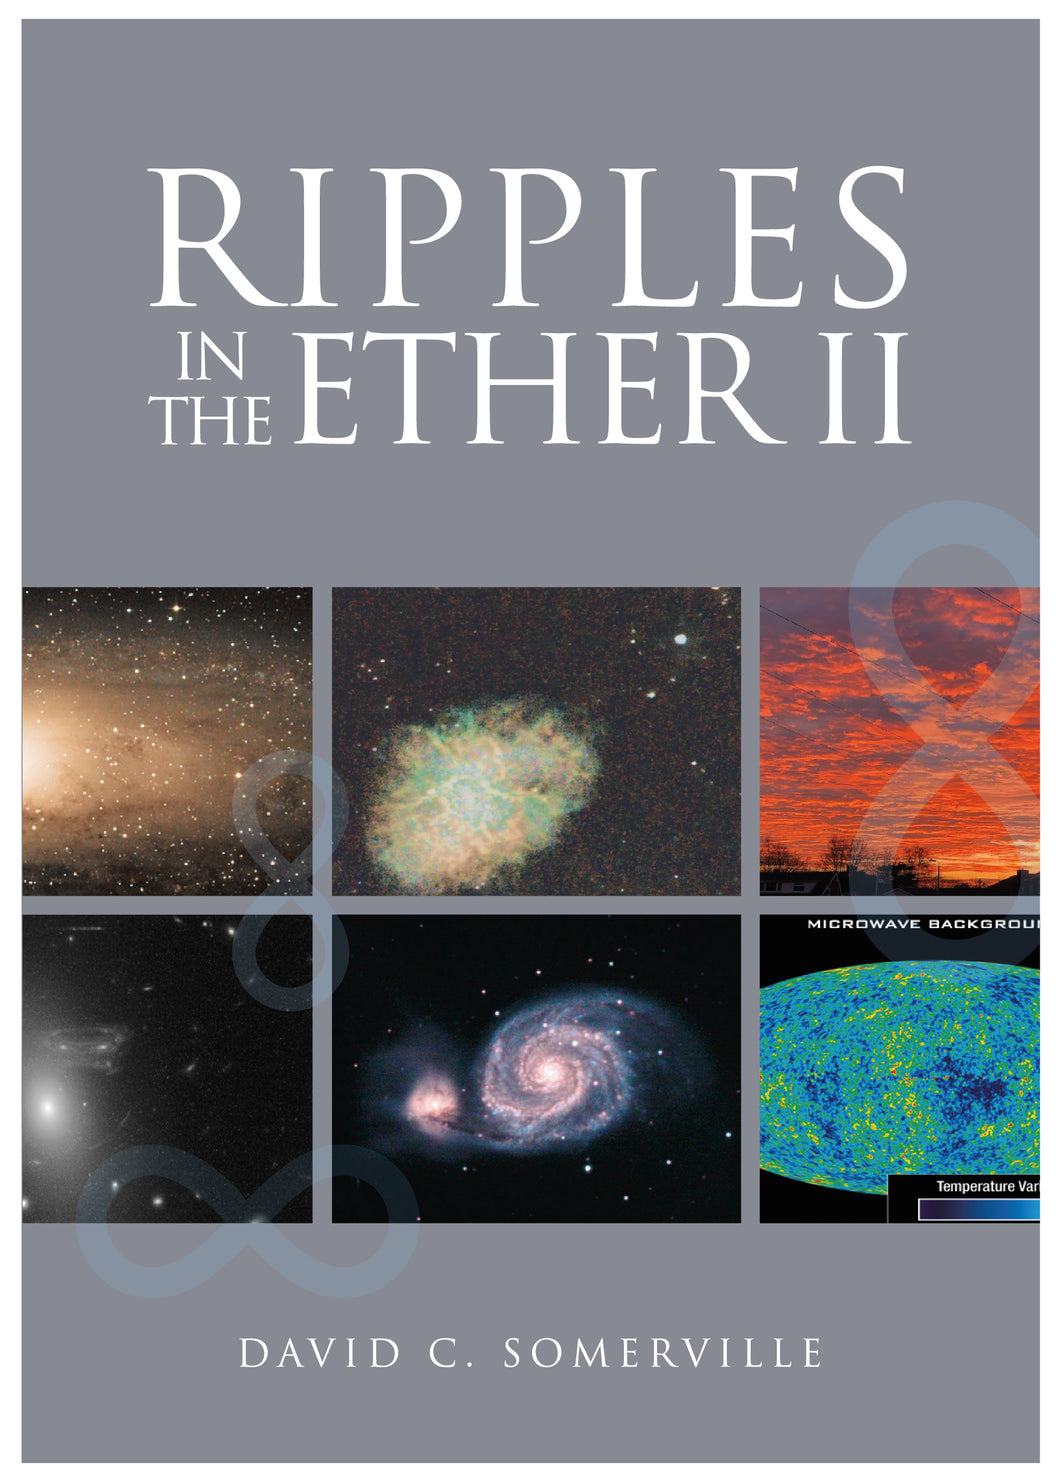 Ripples in the Ether II - David C. Somerville